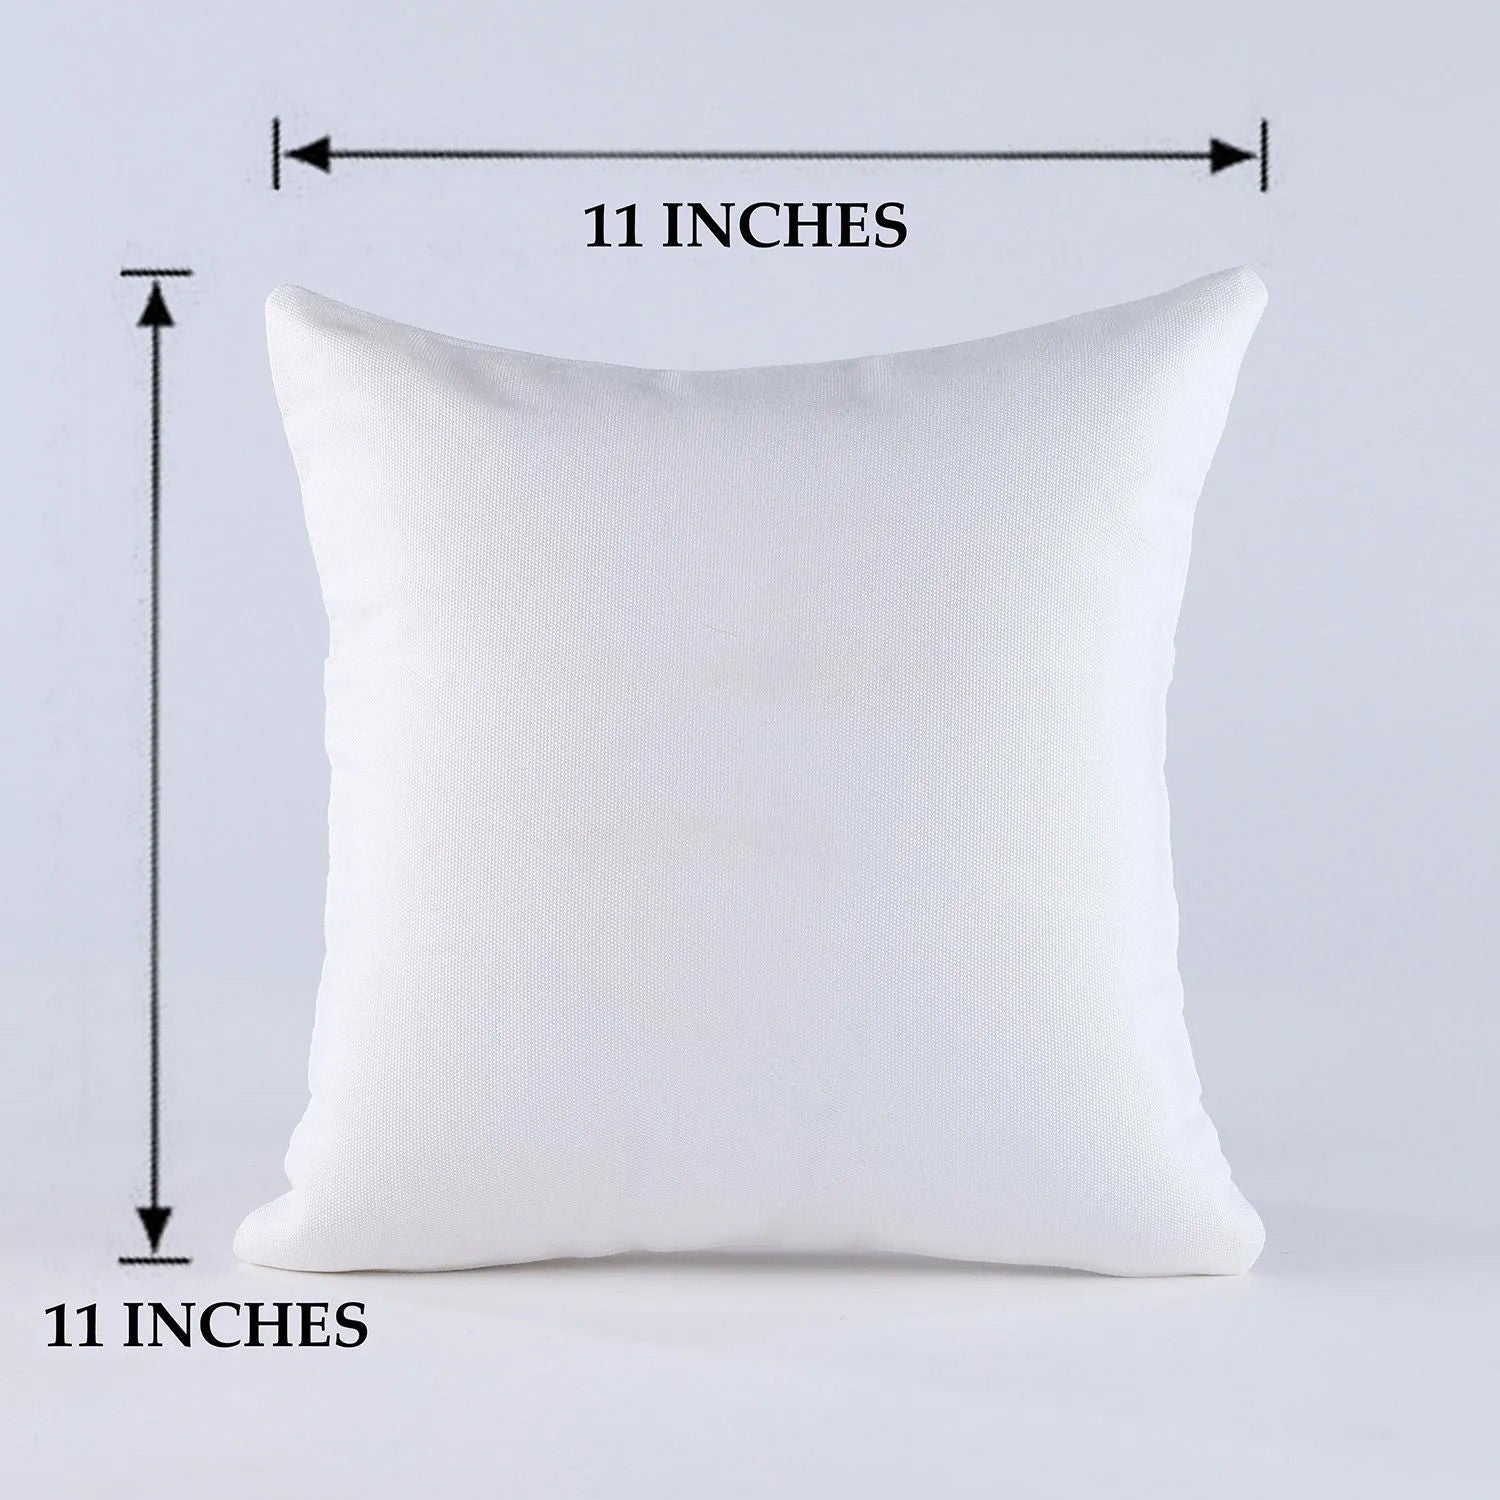 Cushion For Pisces